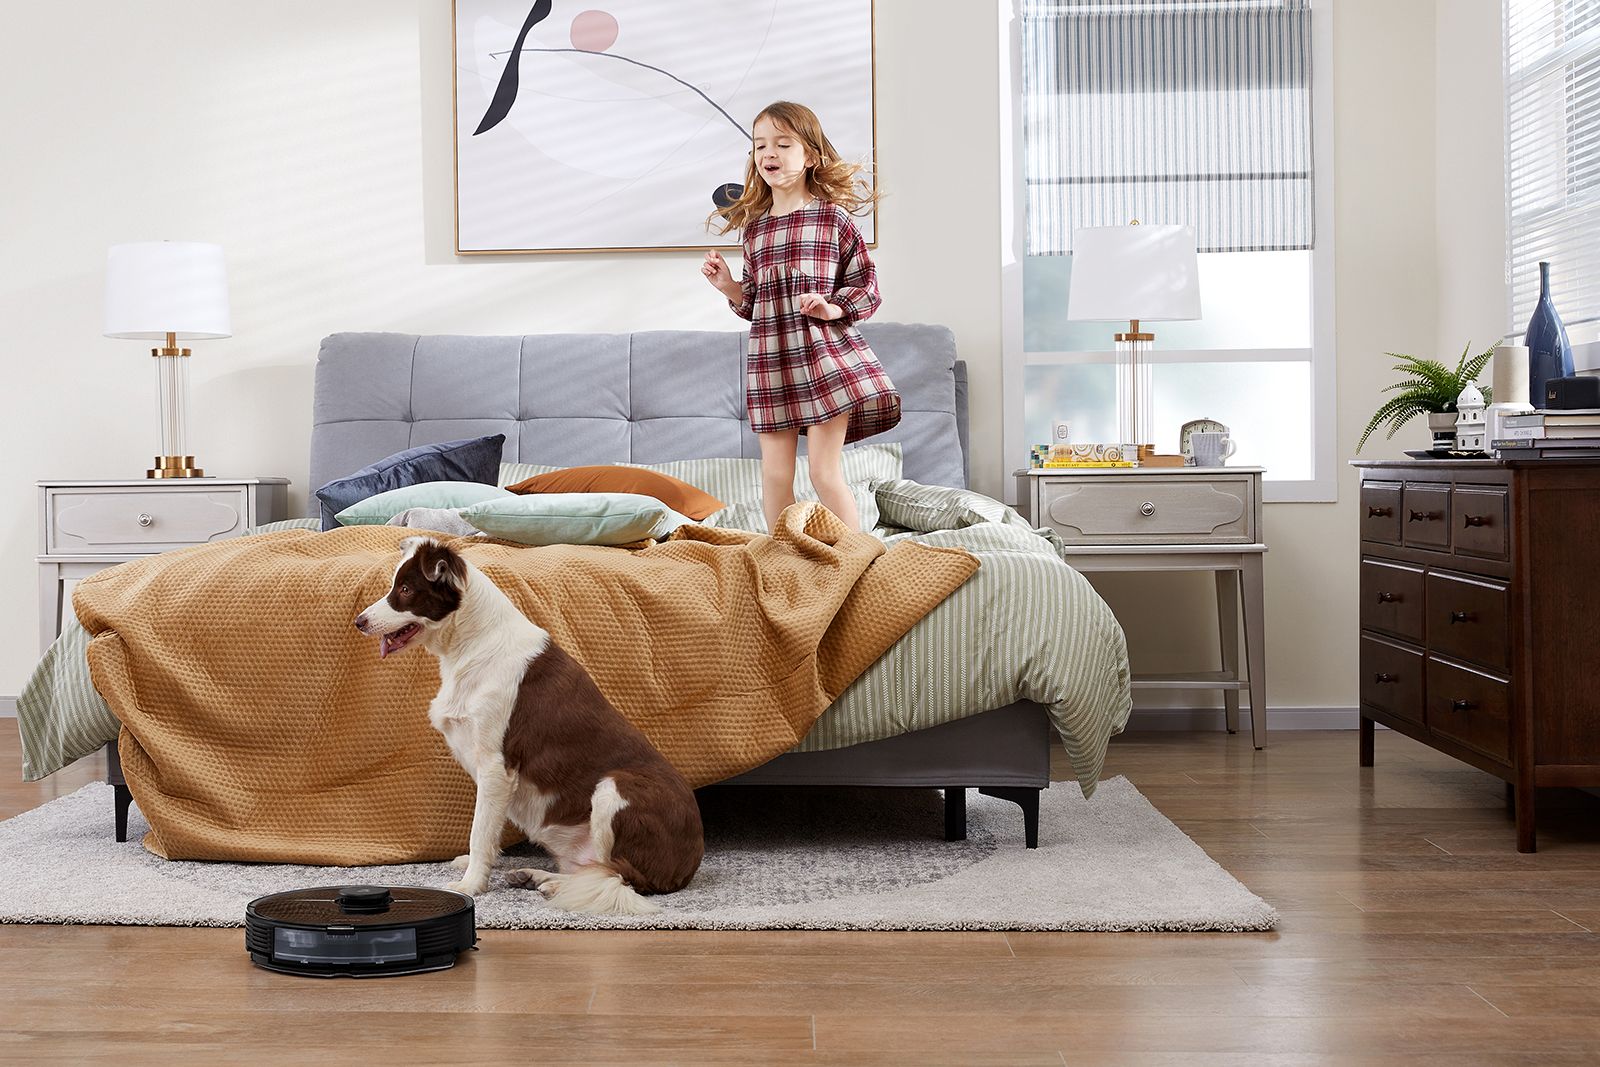 Girl jumps on bed next to dog with Roborock S7 vacuum